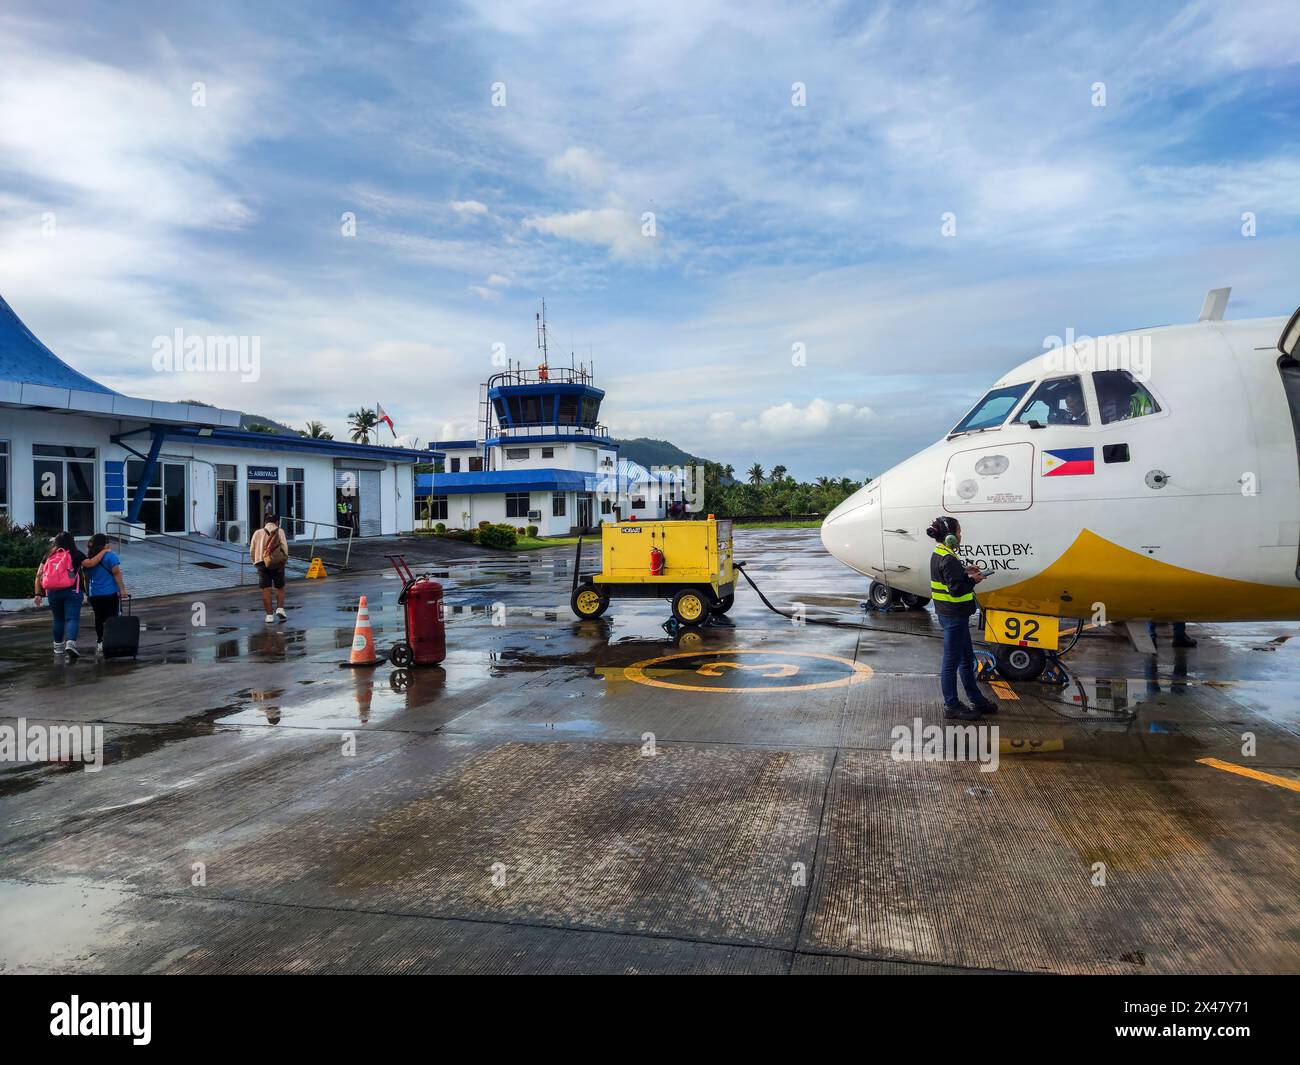 Cebu Pacific Airline lands in the island of Siargao in Mindanao, Philippines Stock Photo